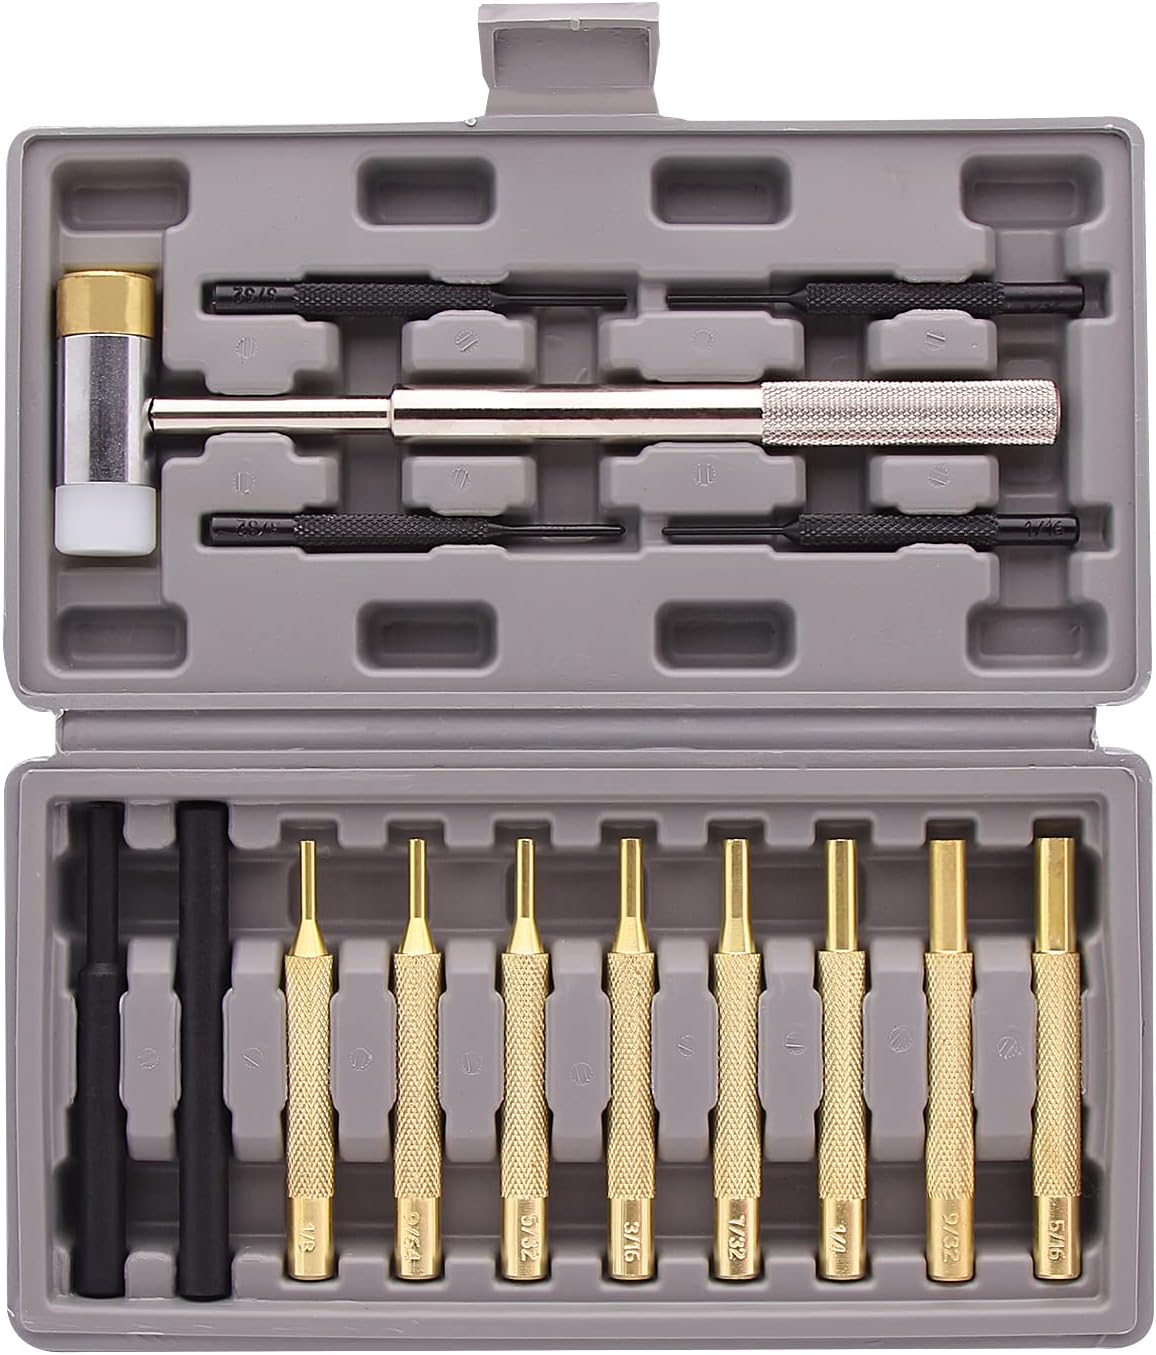 HUROFE Roll Pin Punch Set,15pcs Roll Pin Punch Set and Hammer with Brass, Steel, Plastic Punches and brass/Polymer heads hammers In St